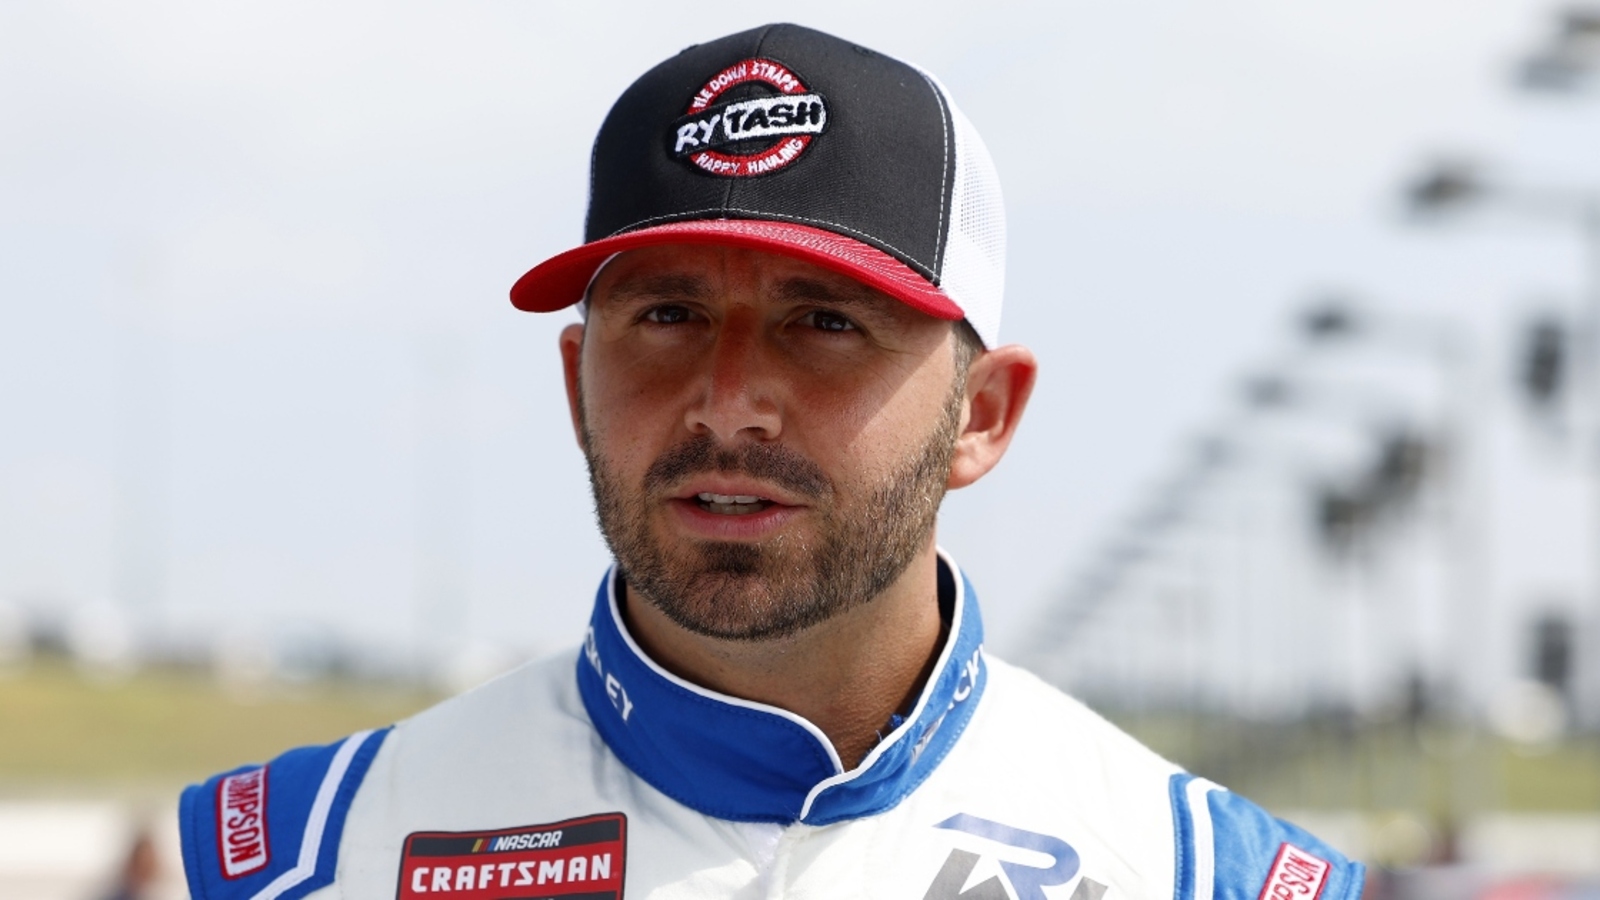 Matt DiBenedetto out at Rackley W.A.R. for final three Truck Series races